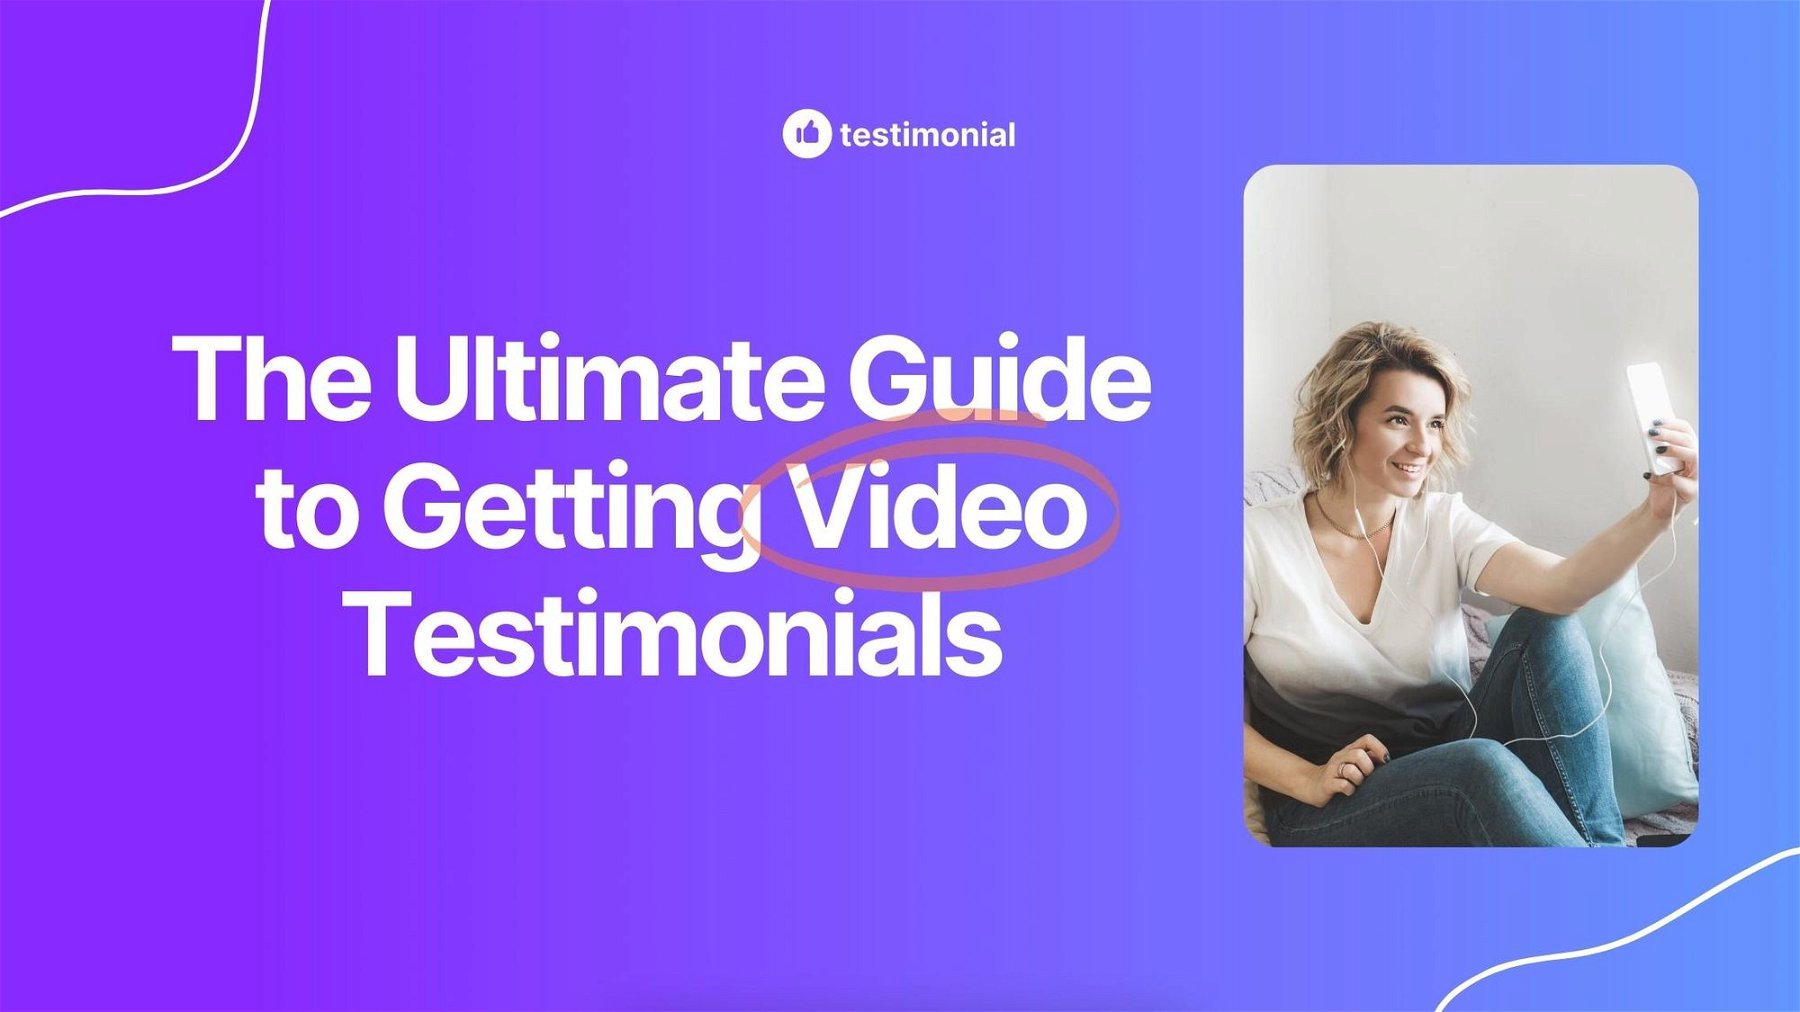 The Ultimate Guide to Getting Video Testimonials From Your Customers